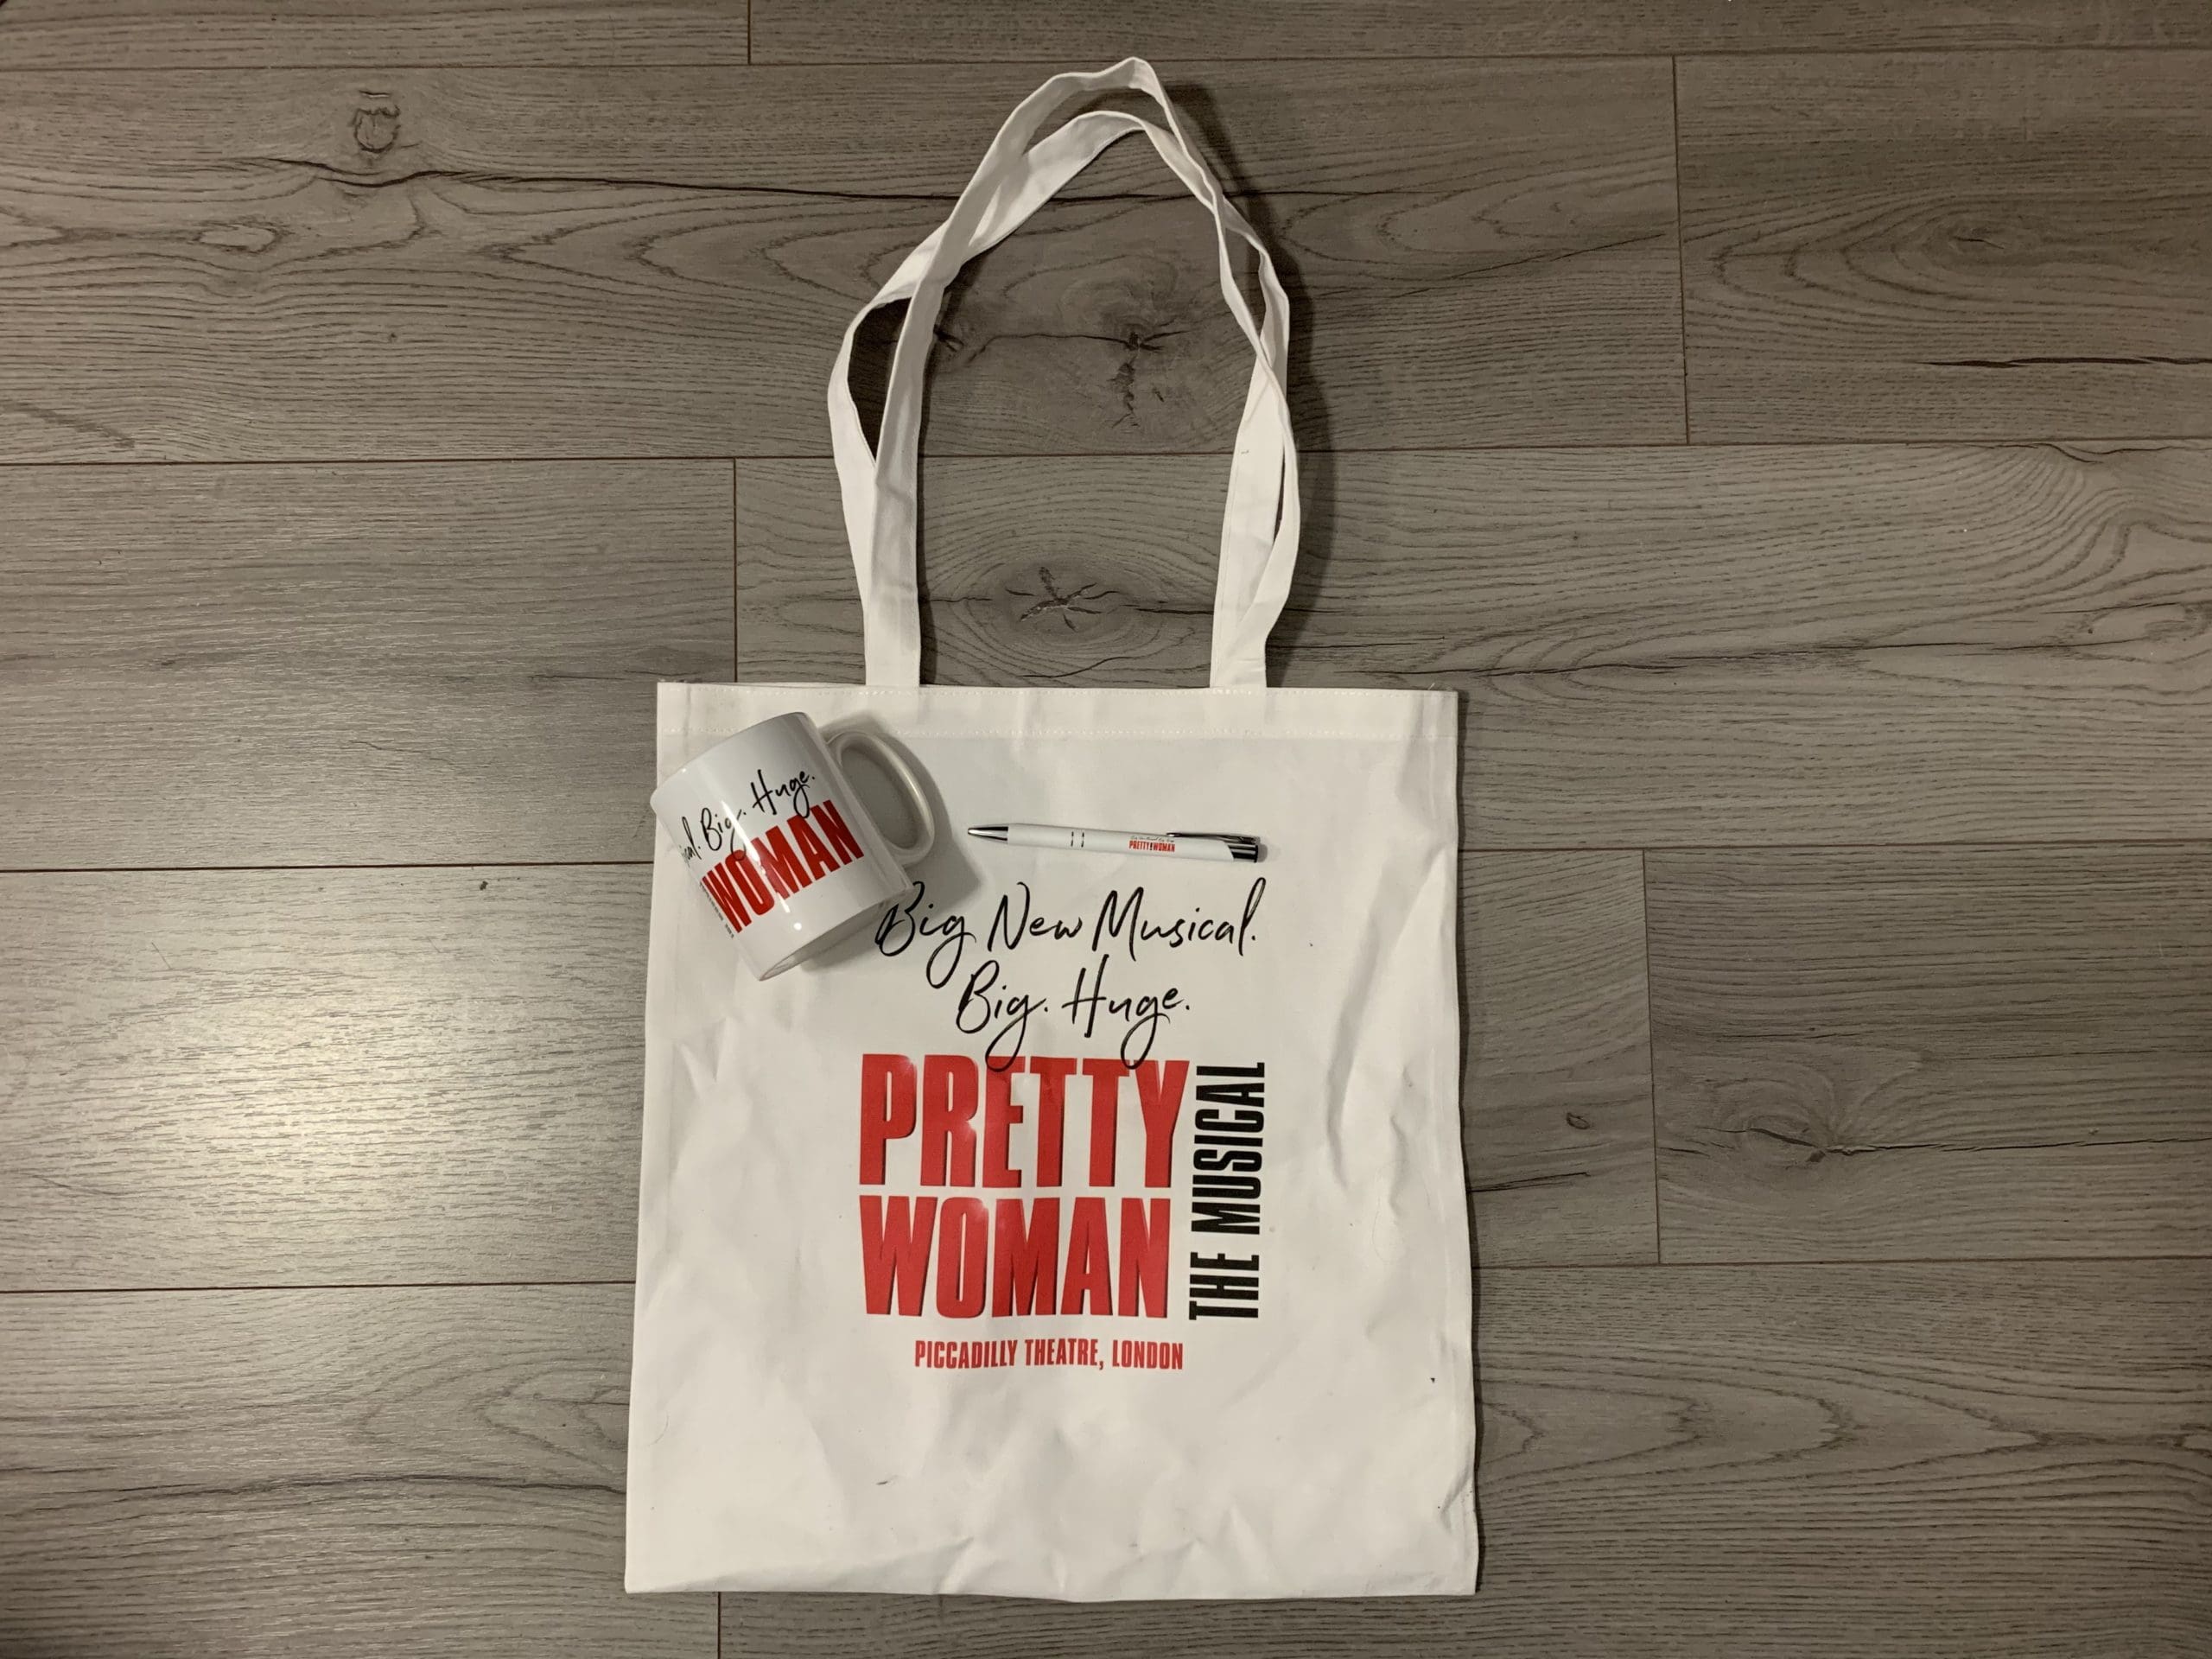 Enter our competition for a chance to win a Pretty Woman tote bag, mug and pen